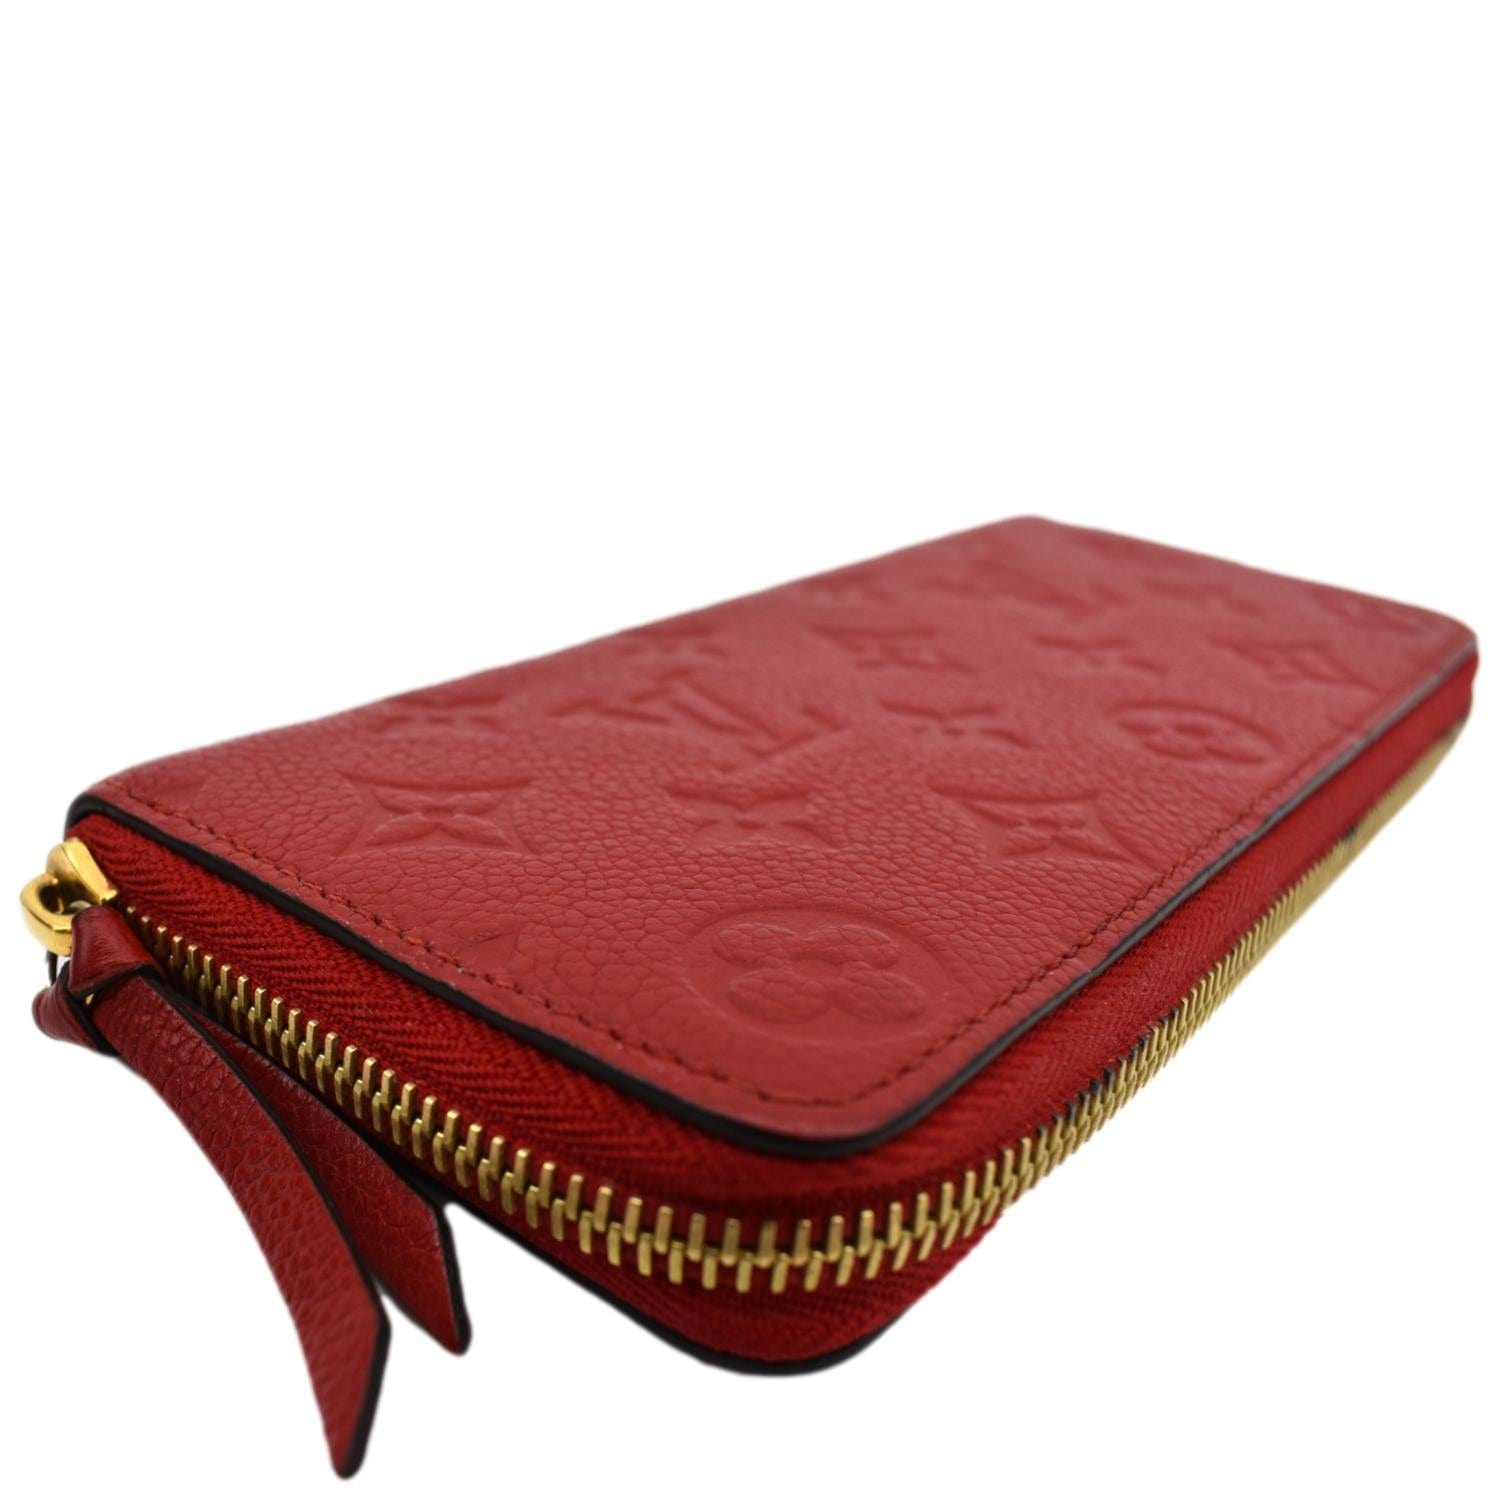 Louis Vuitton Epi Leather Clemence Wallet - Red Wallets